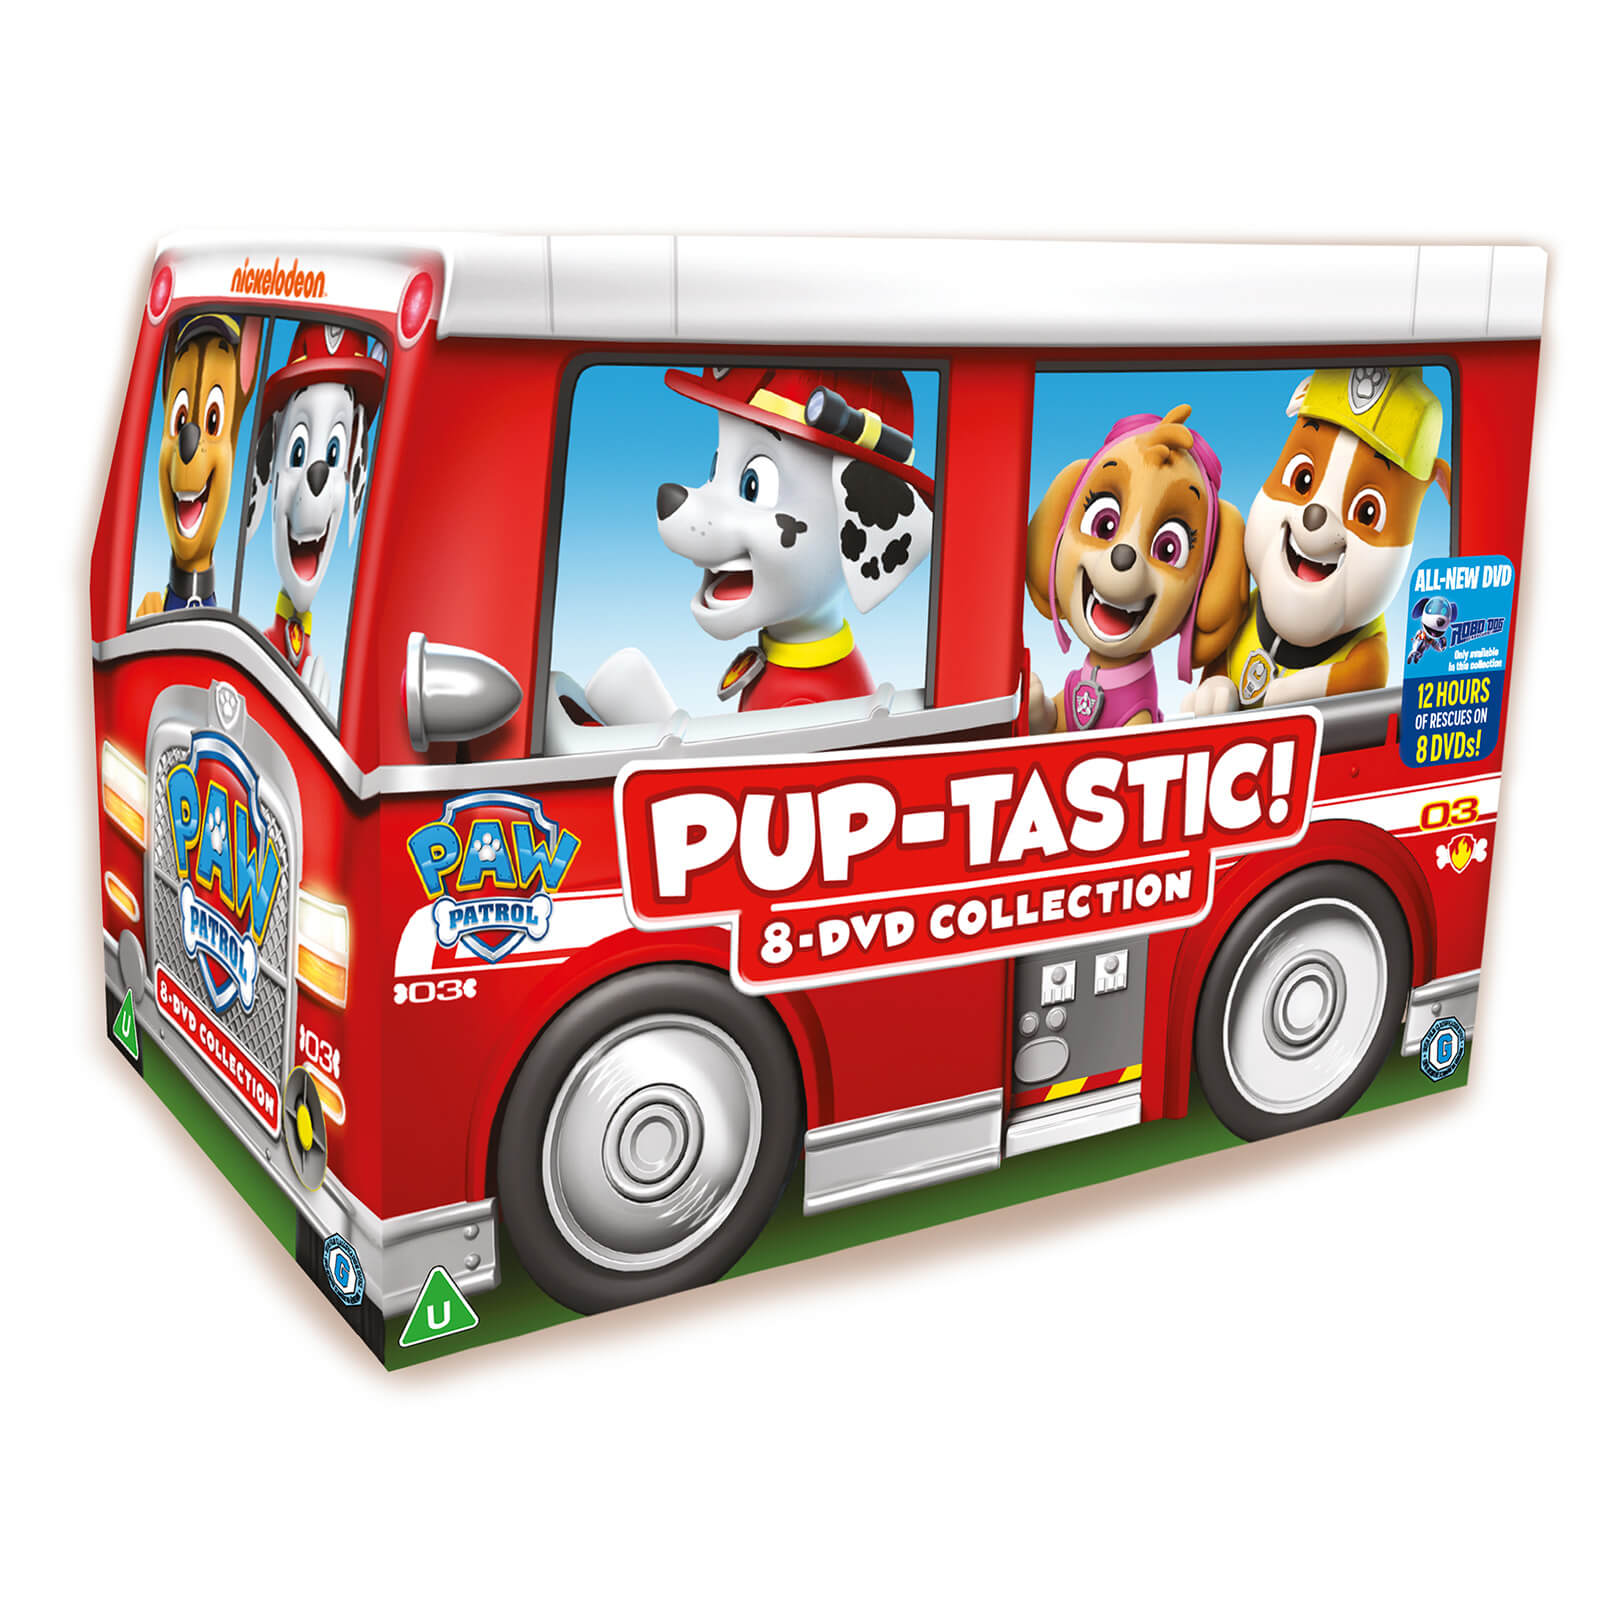 Paw Patrol Pup-Tastic 8-DVD Collection